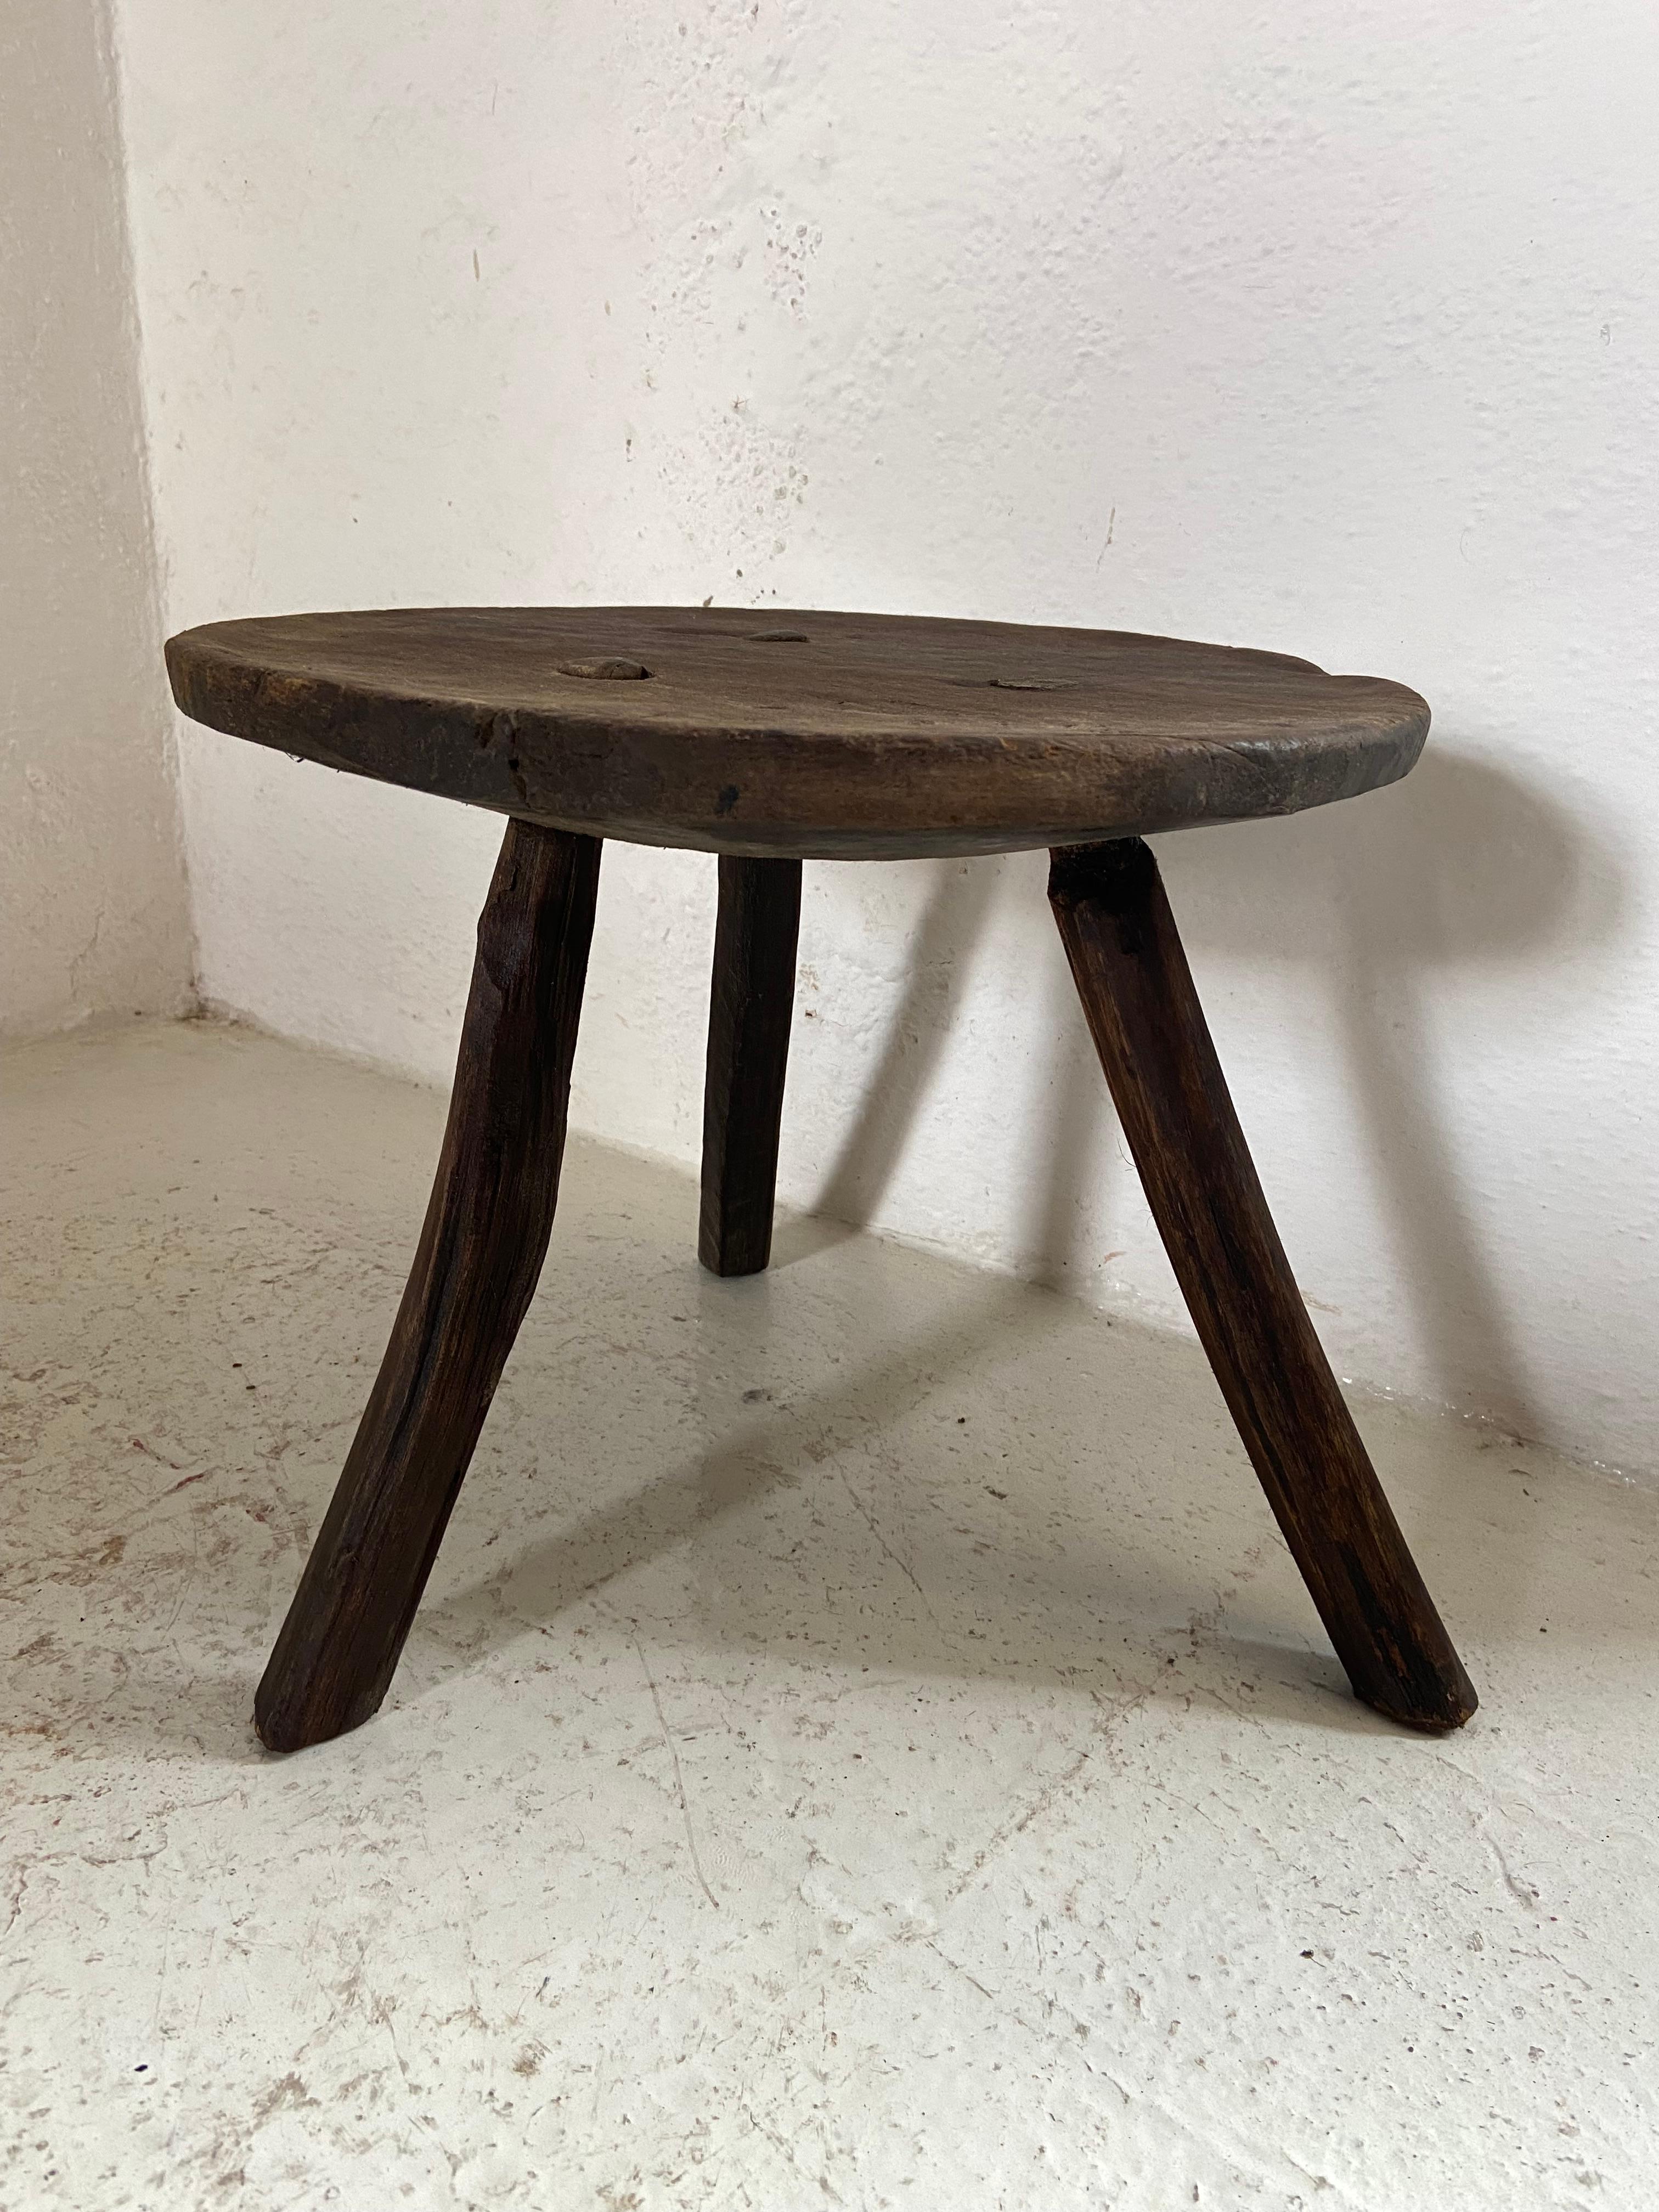 Mesquite Stool by Artefakto
Unique piece.
Dimensions: Ø 34 x H 30 cm.
Materials: Mesquite wood.

Guanajuato, Mexico 1950 ´s.

Artefakto opened its doors on the Riviera Nayarit coastline in 2010. With an unrelenting passion for all things